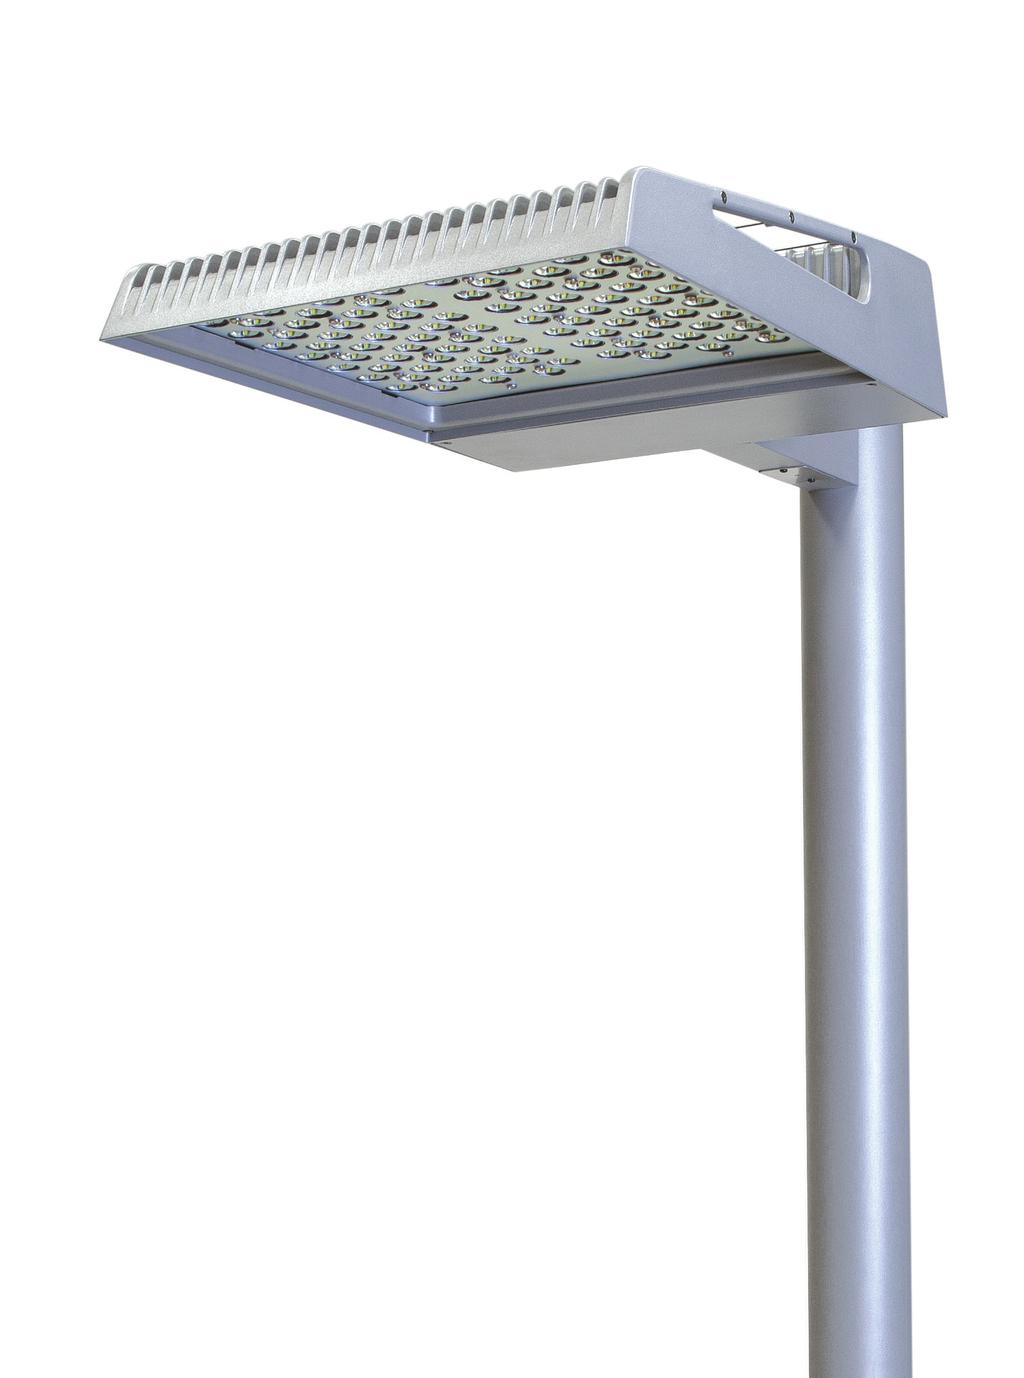 An economy LED luminaire that delivers big on style and performance The specifier searching for an economy LED outdoor area luminaire that also delivers big on style and